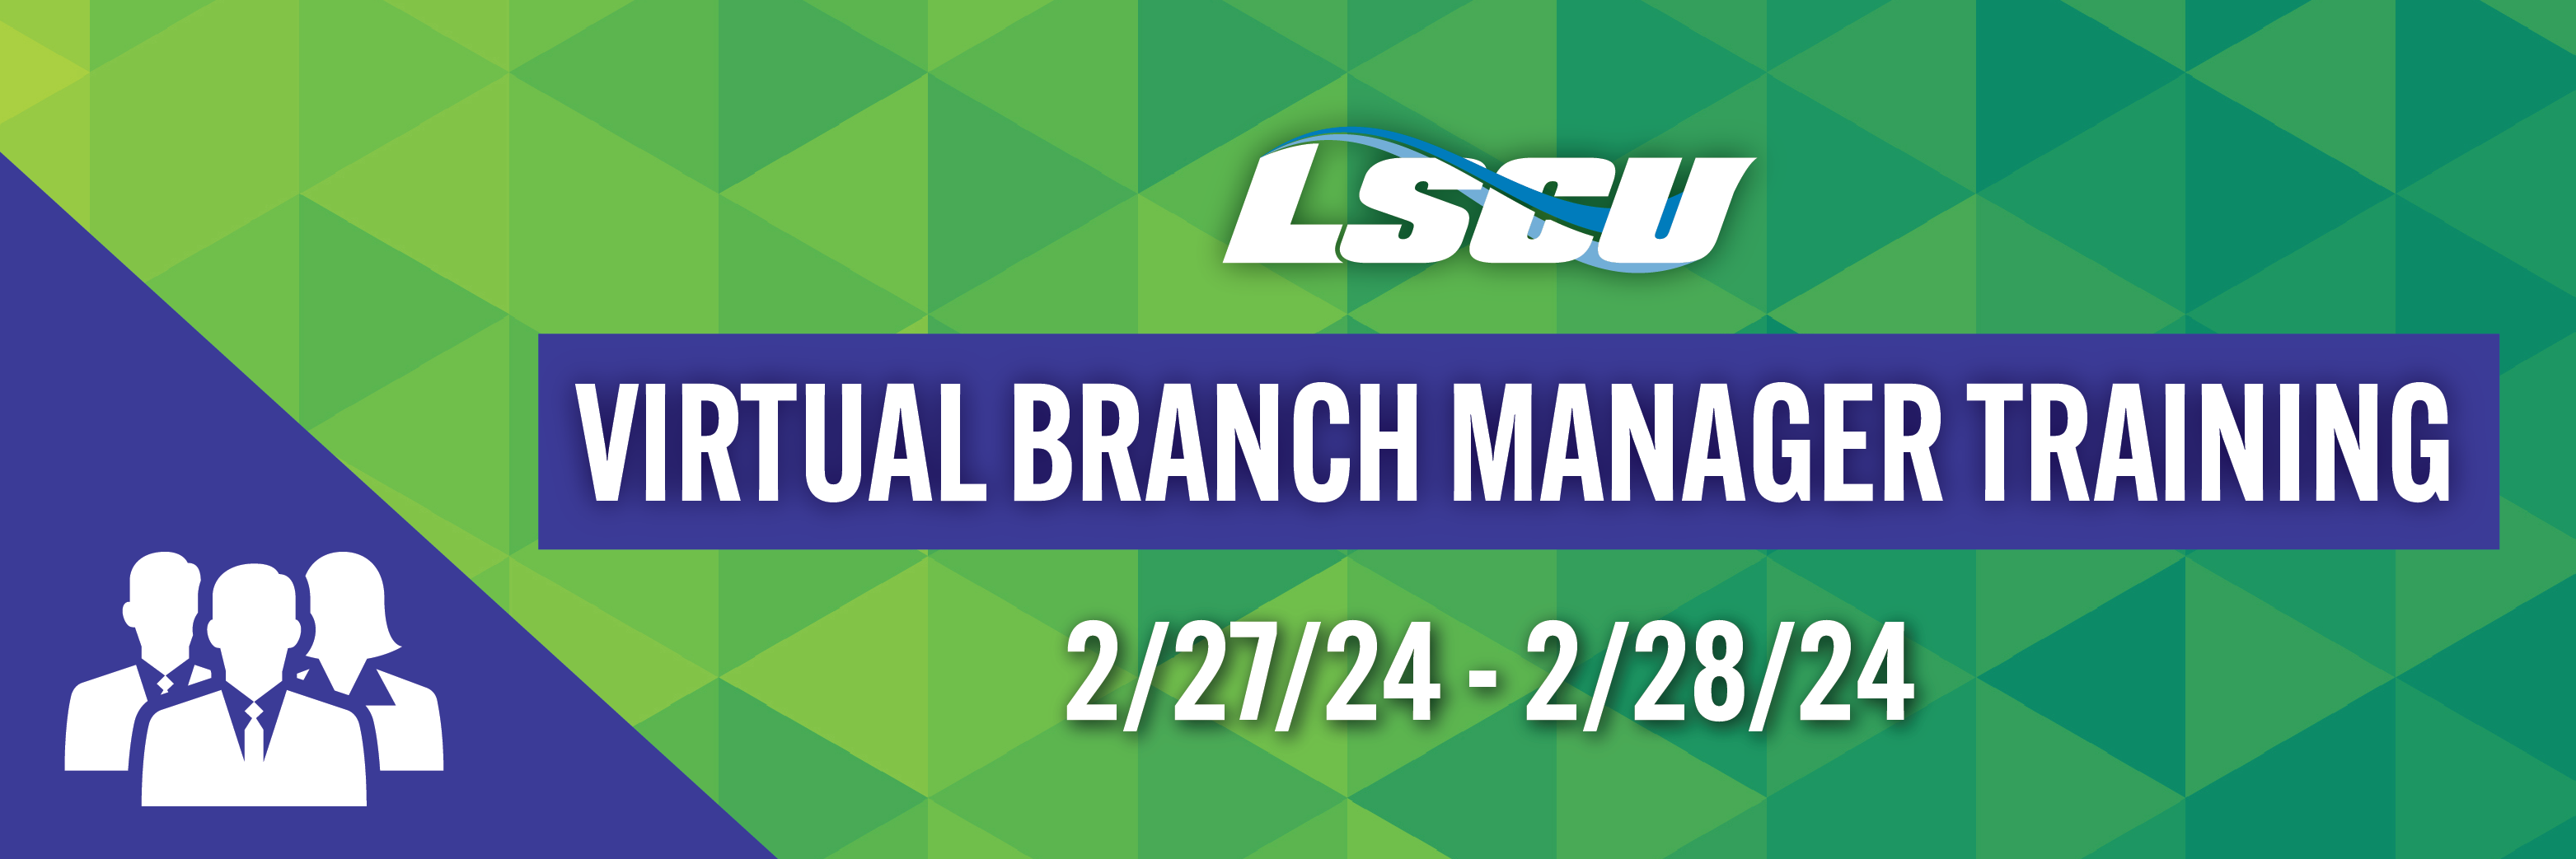 Virtual Branch Manager Training - Spring